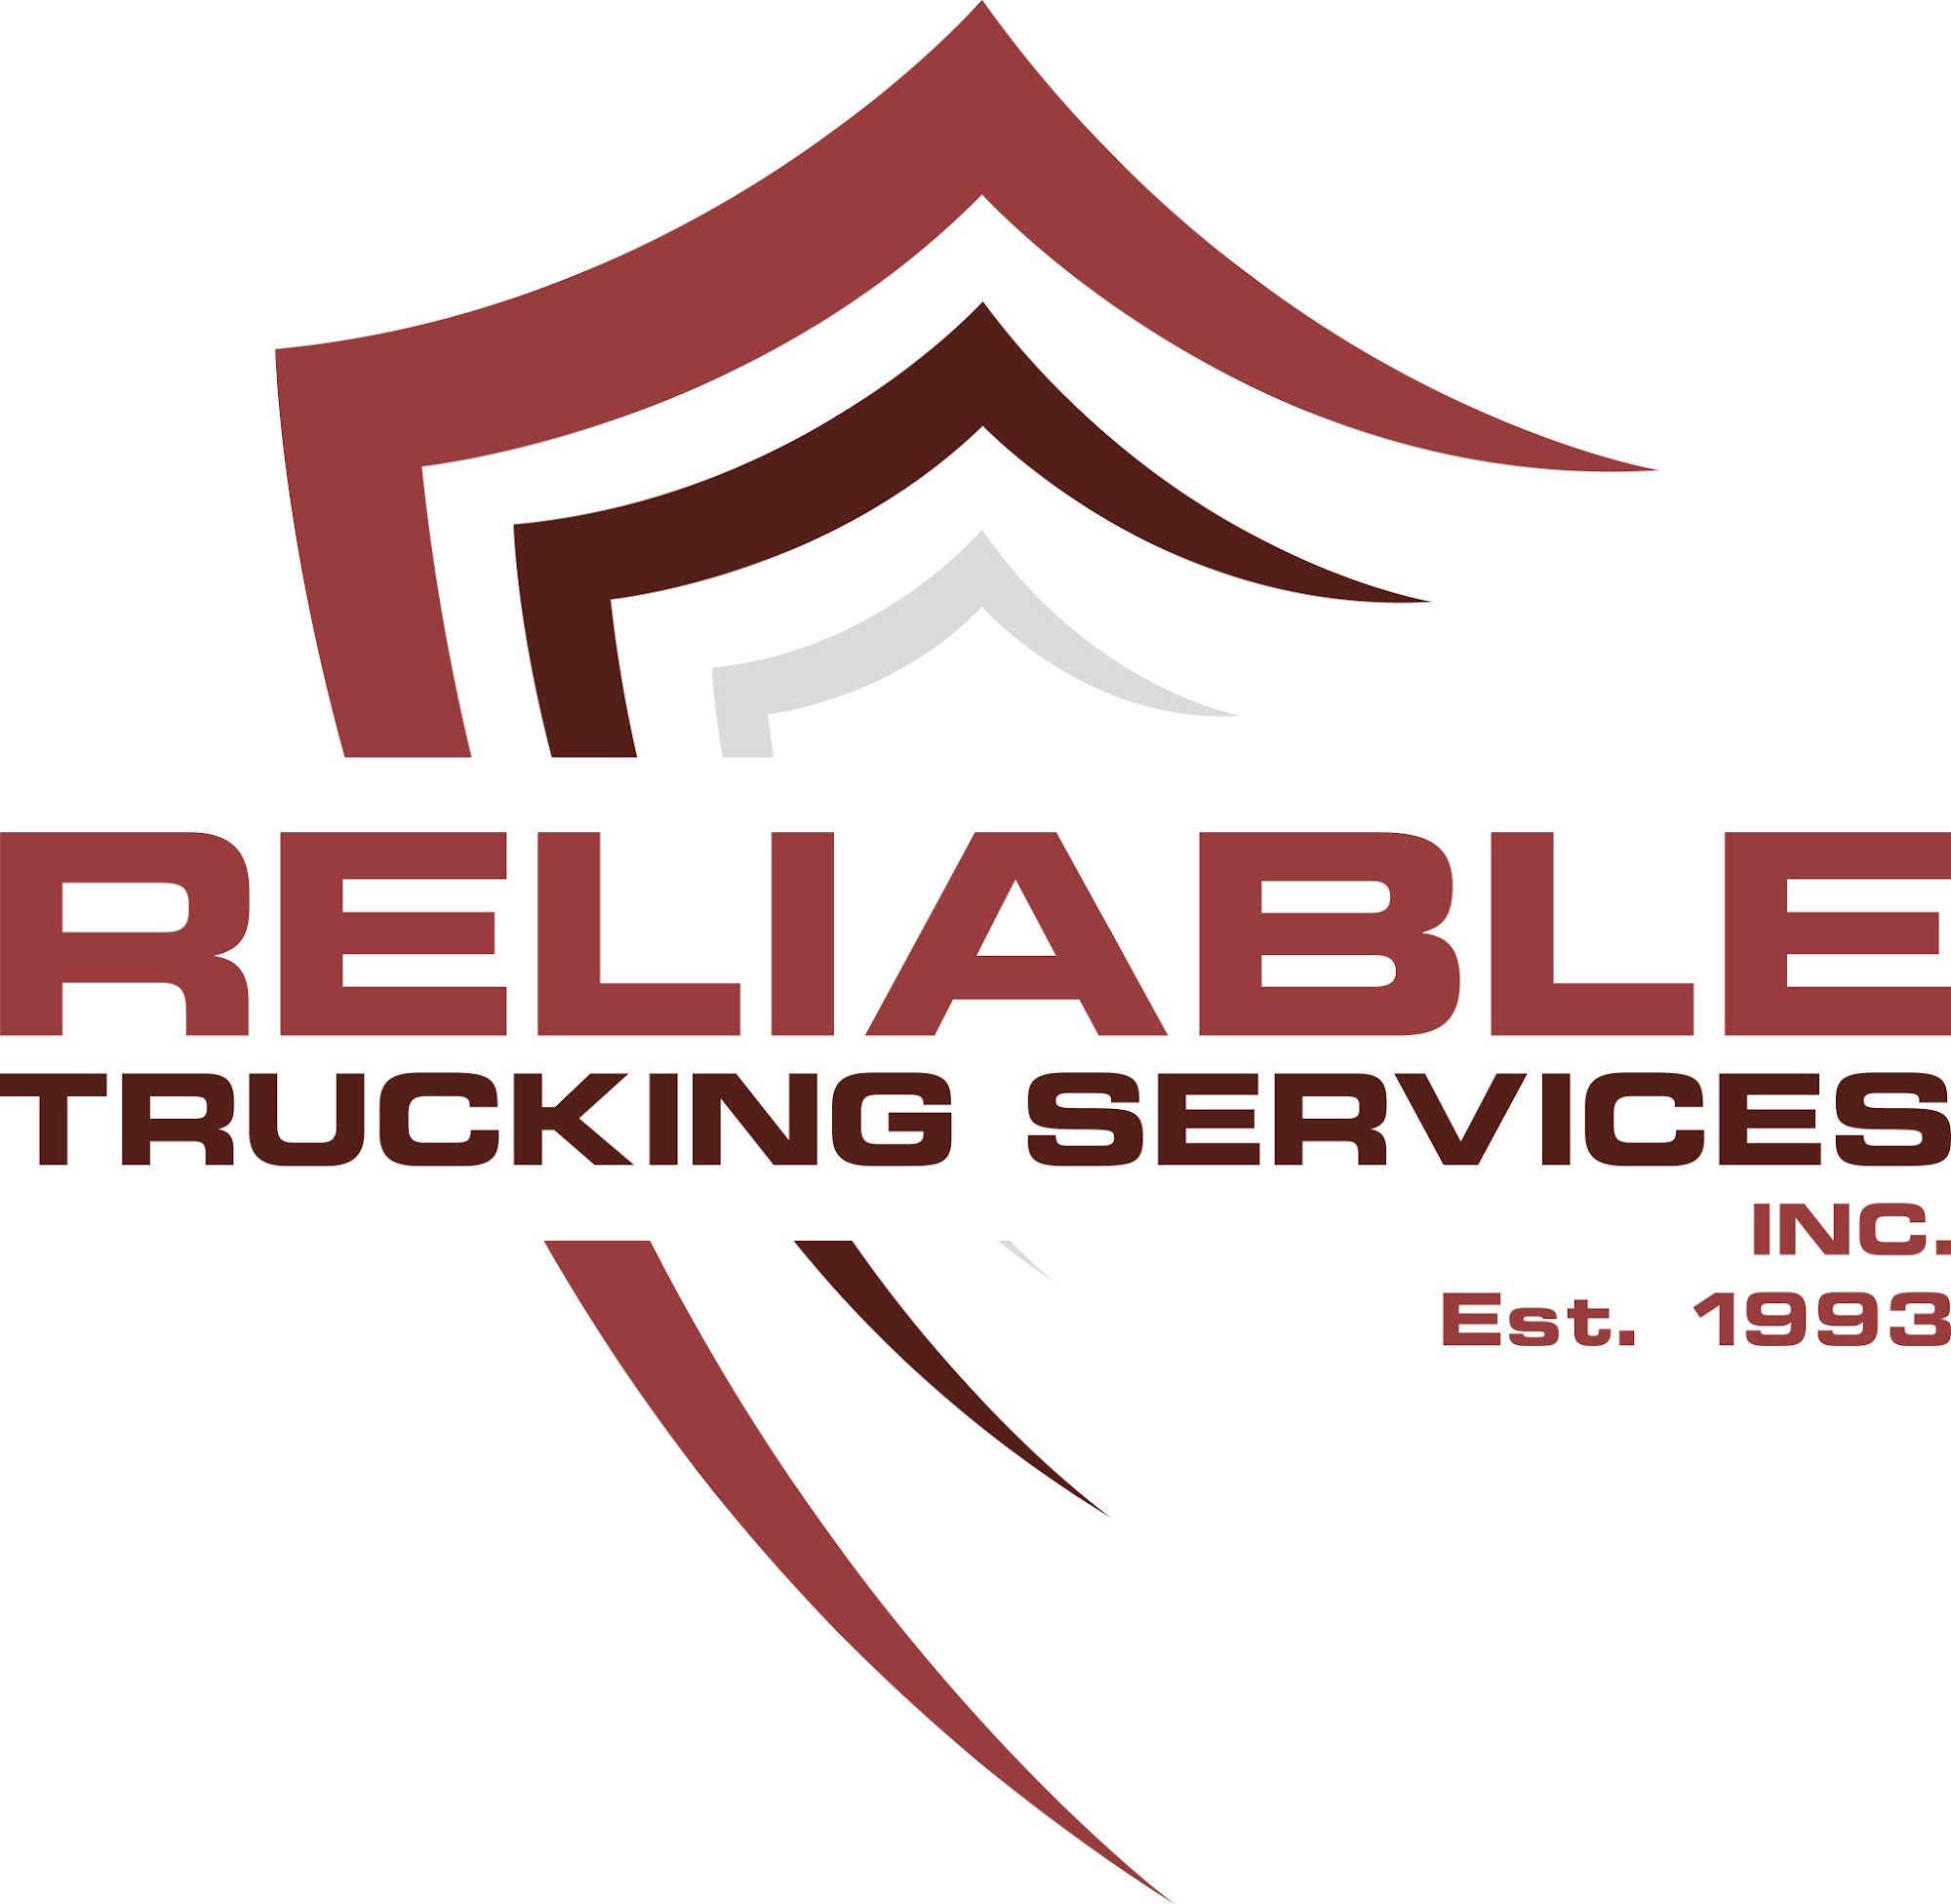 Reliable Trucking Services Inc 15 Cooperative Way, Wright City Missouri 63390